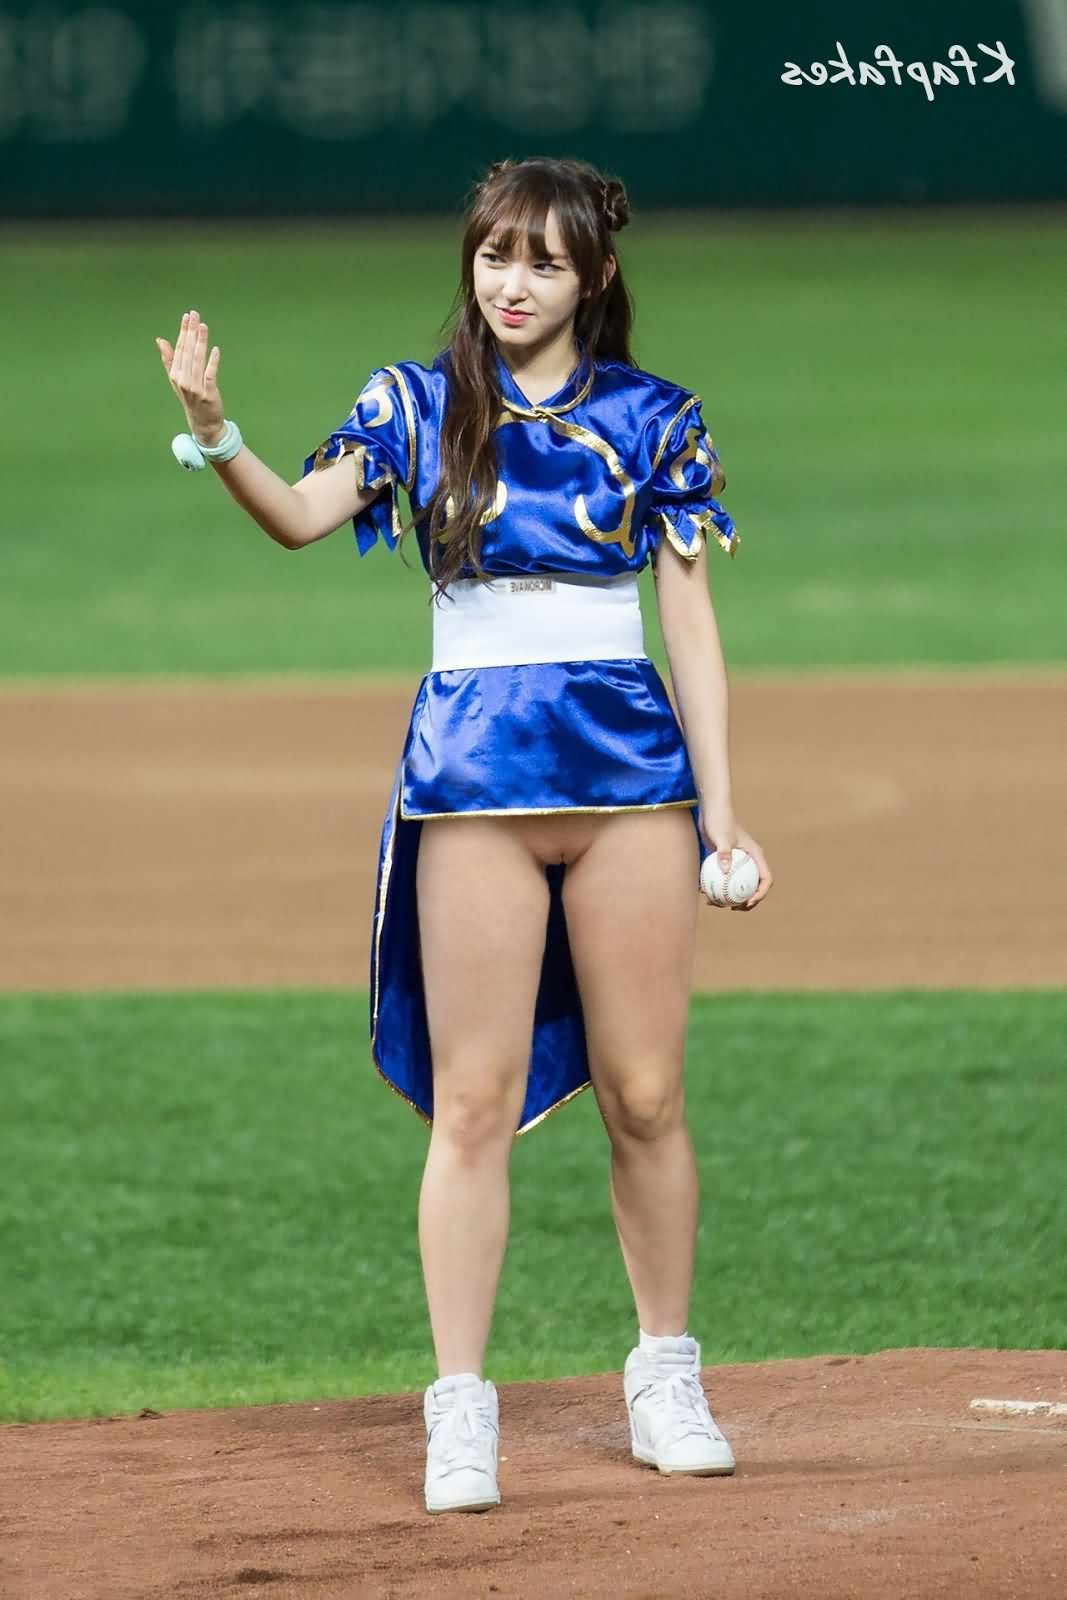 Cheng Xiao is a Chinese singer based in South Korea and member of South